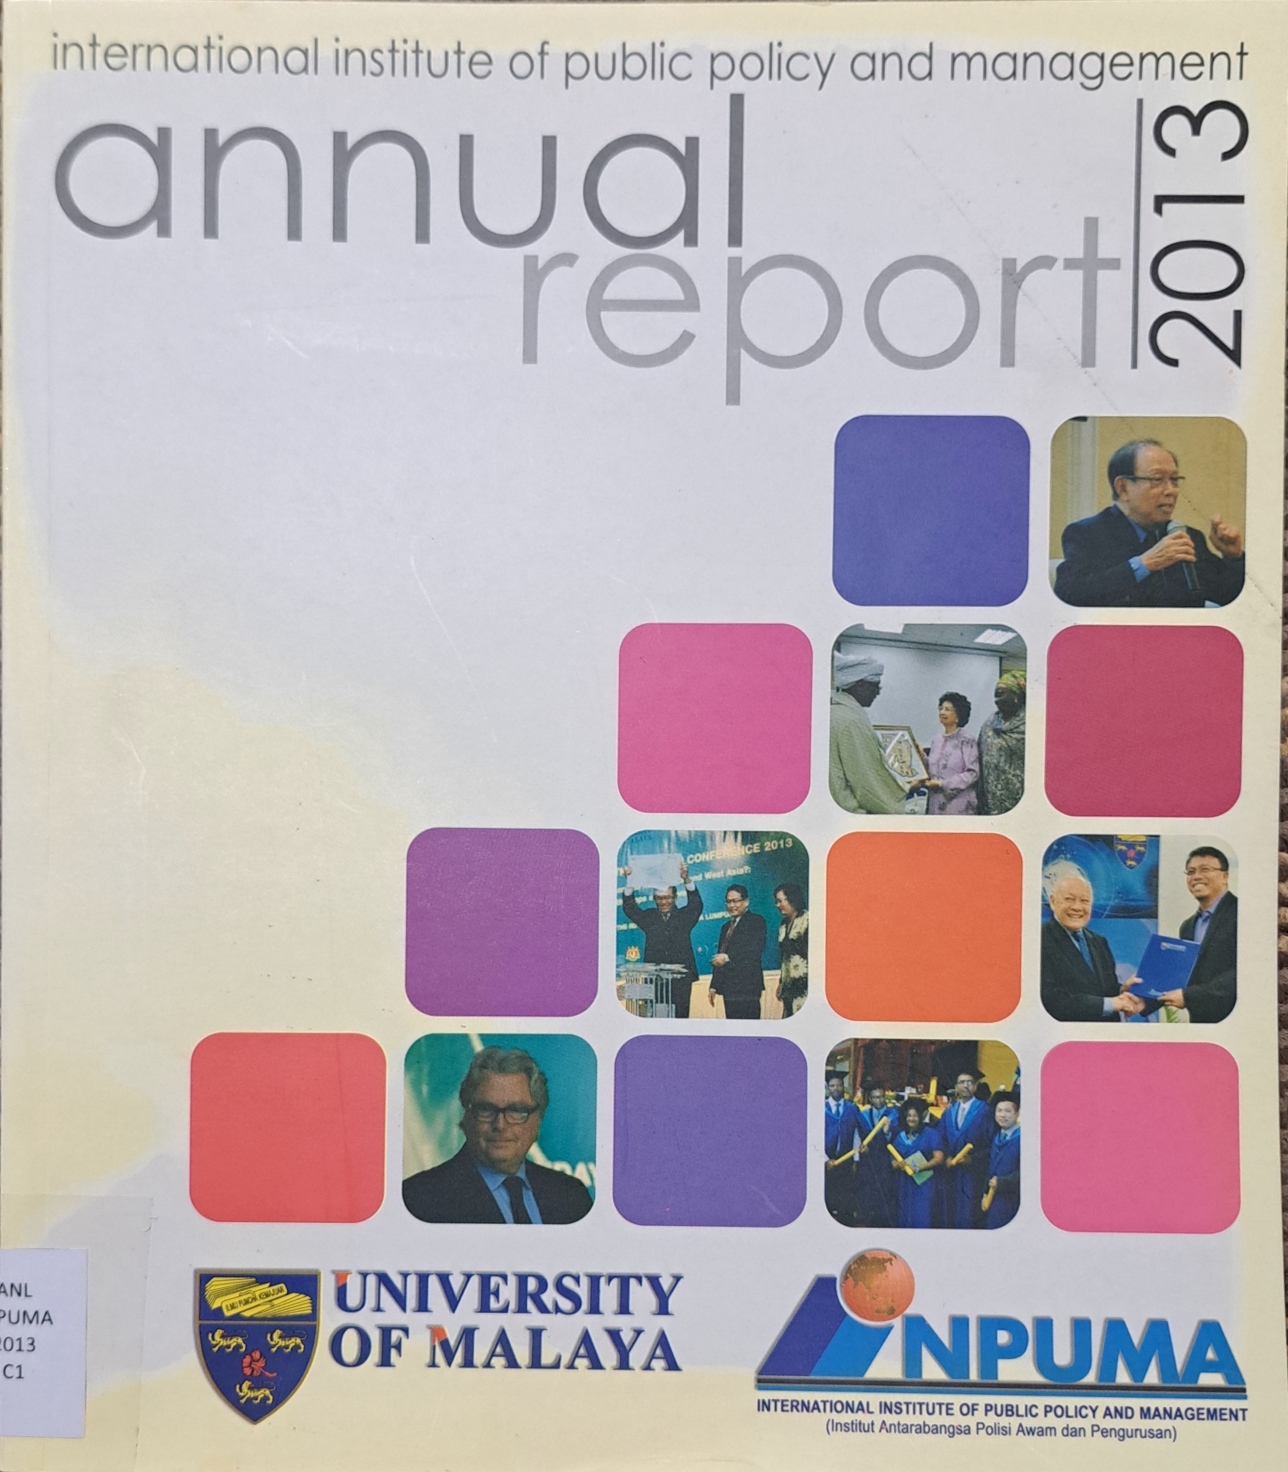 Cover image for Annual Report 2013 International Institute of Public Policy and Management (INPUMA) bibliographic